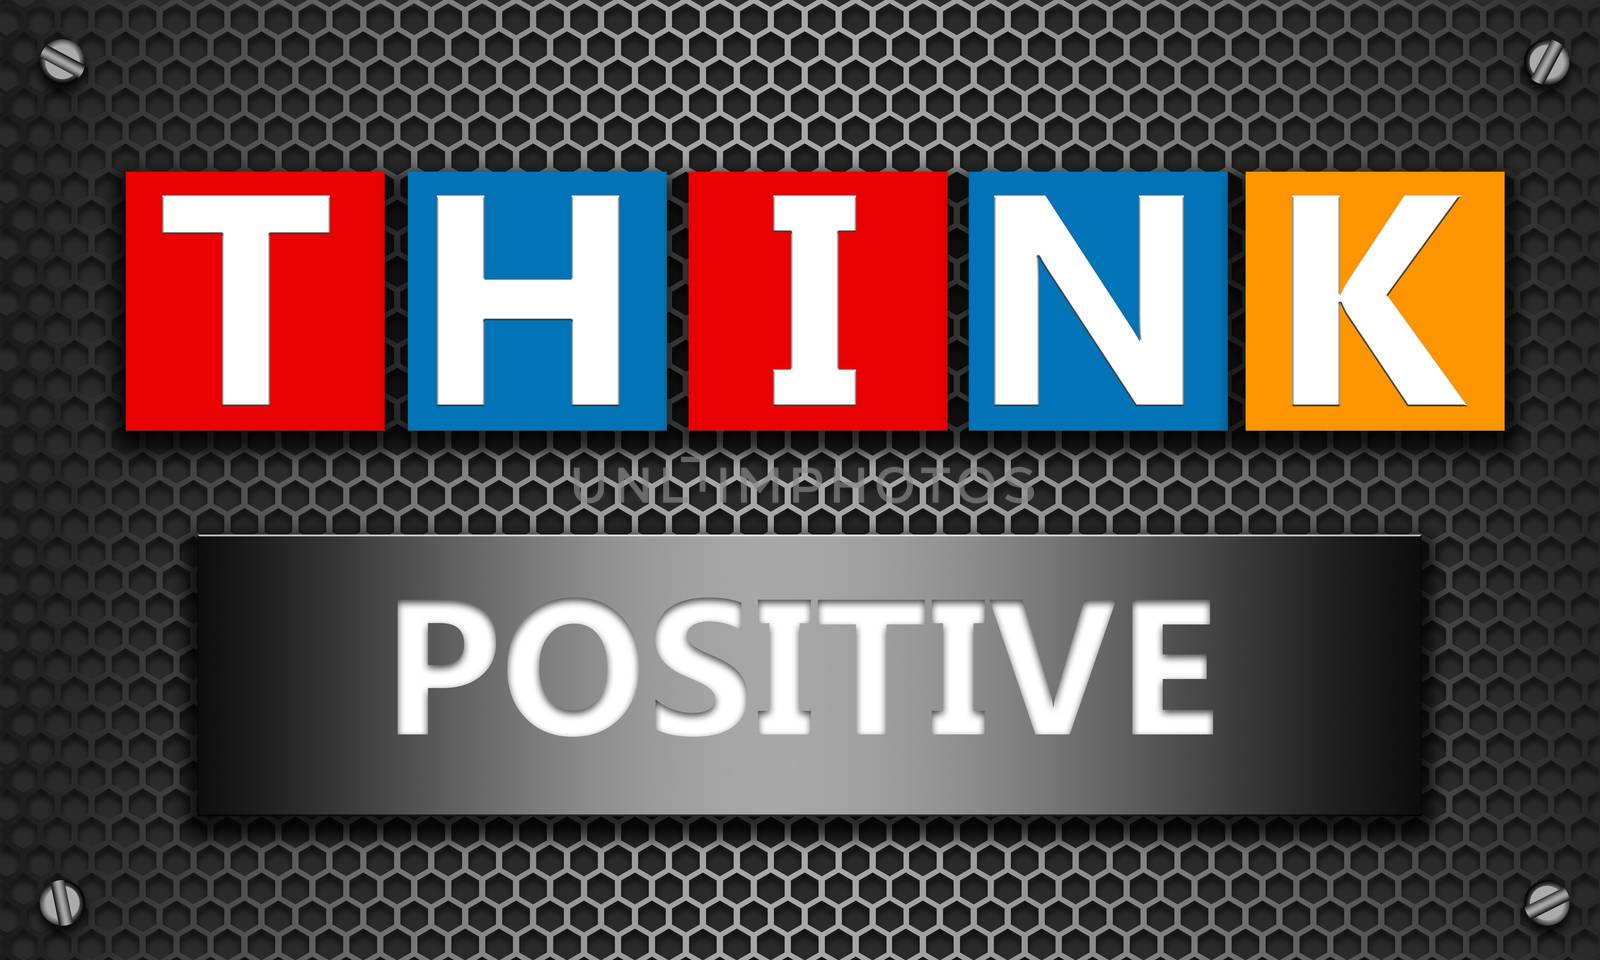 Think positive concept on mesh hexagon background, 3d rendering